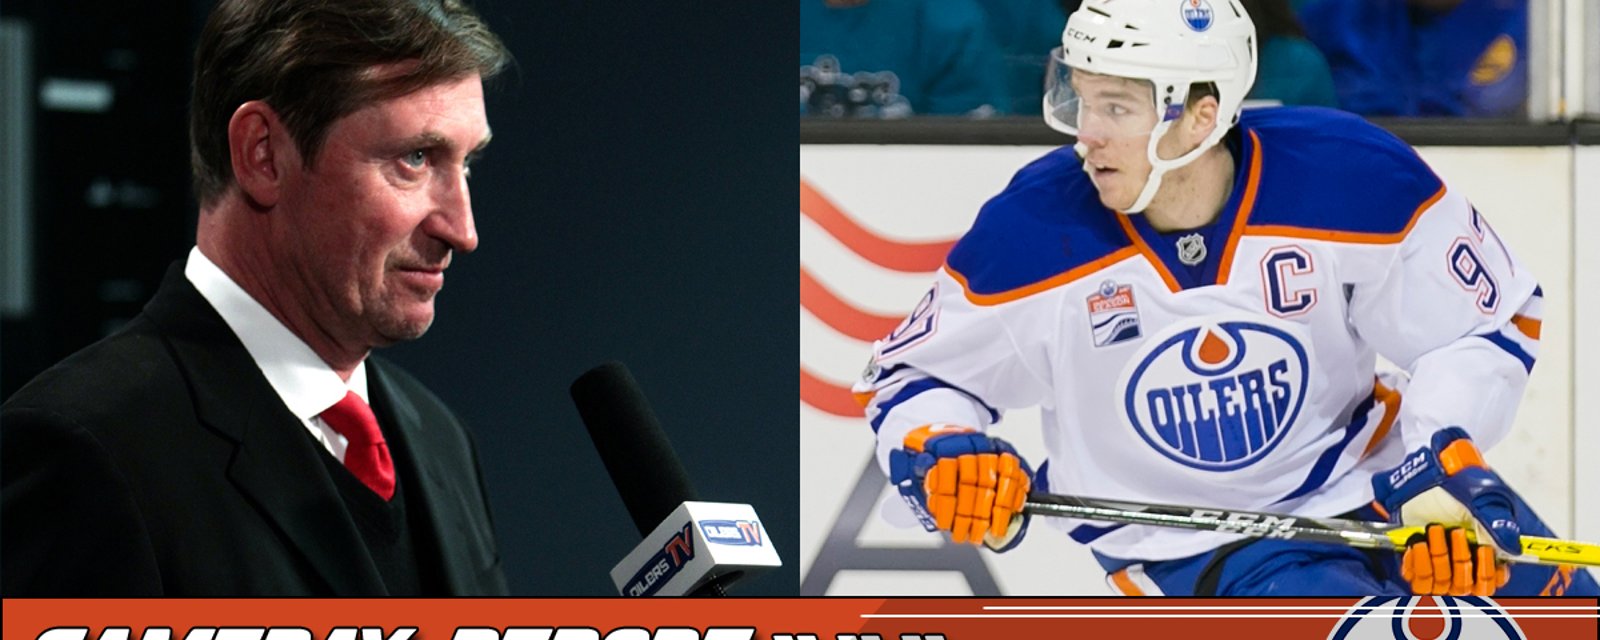 Connor McDavid responds to Ryan Kesler's confrontation in one fashion way.